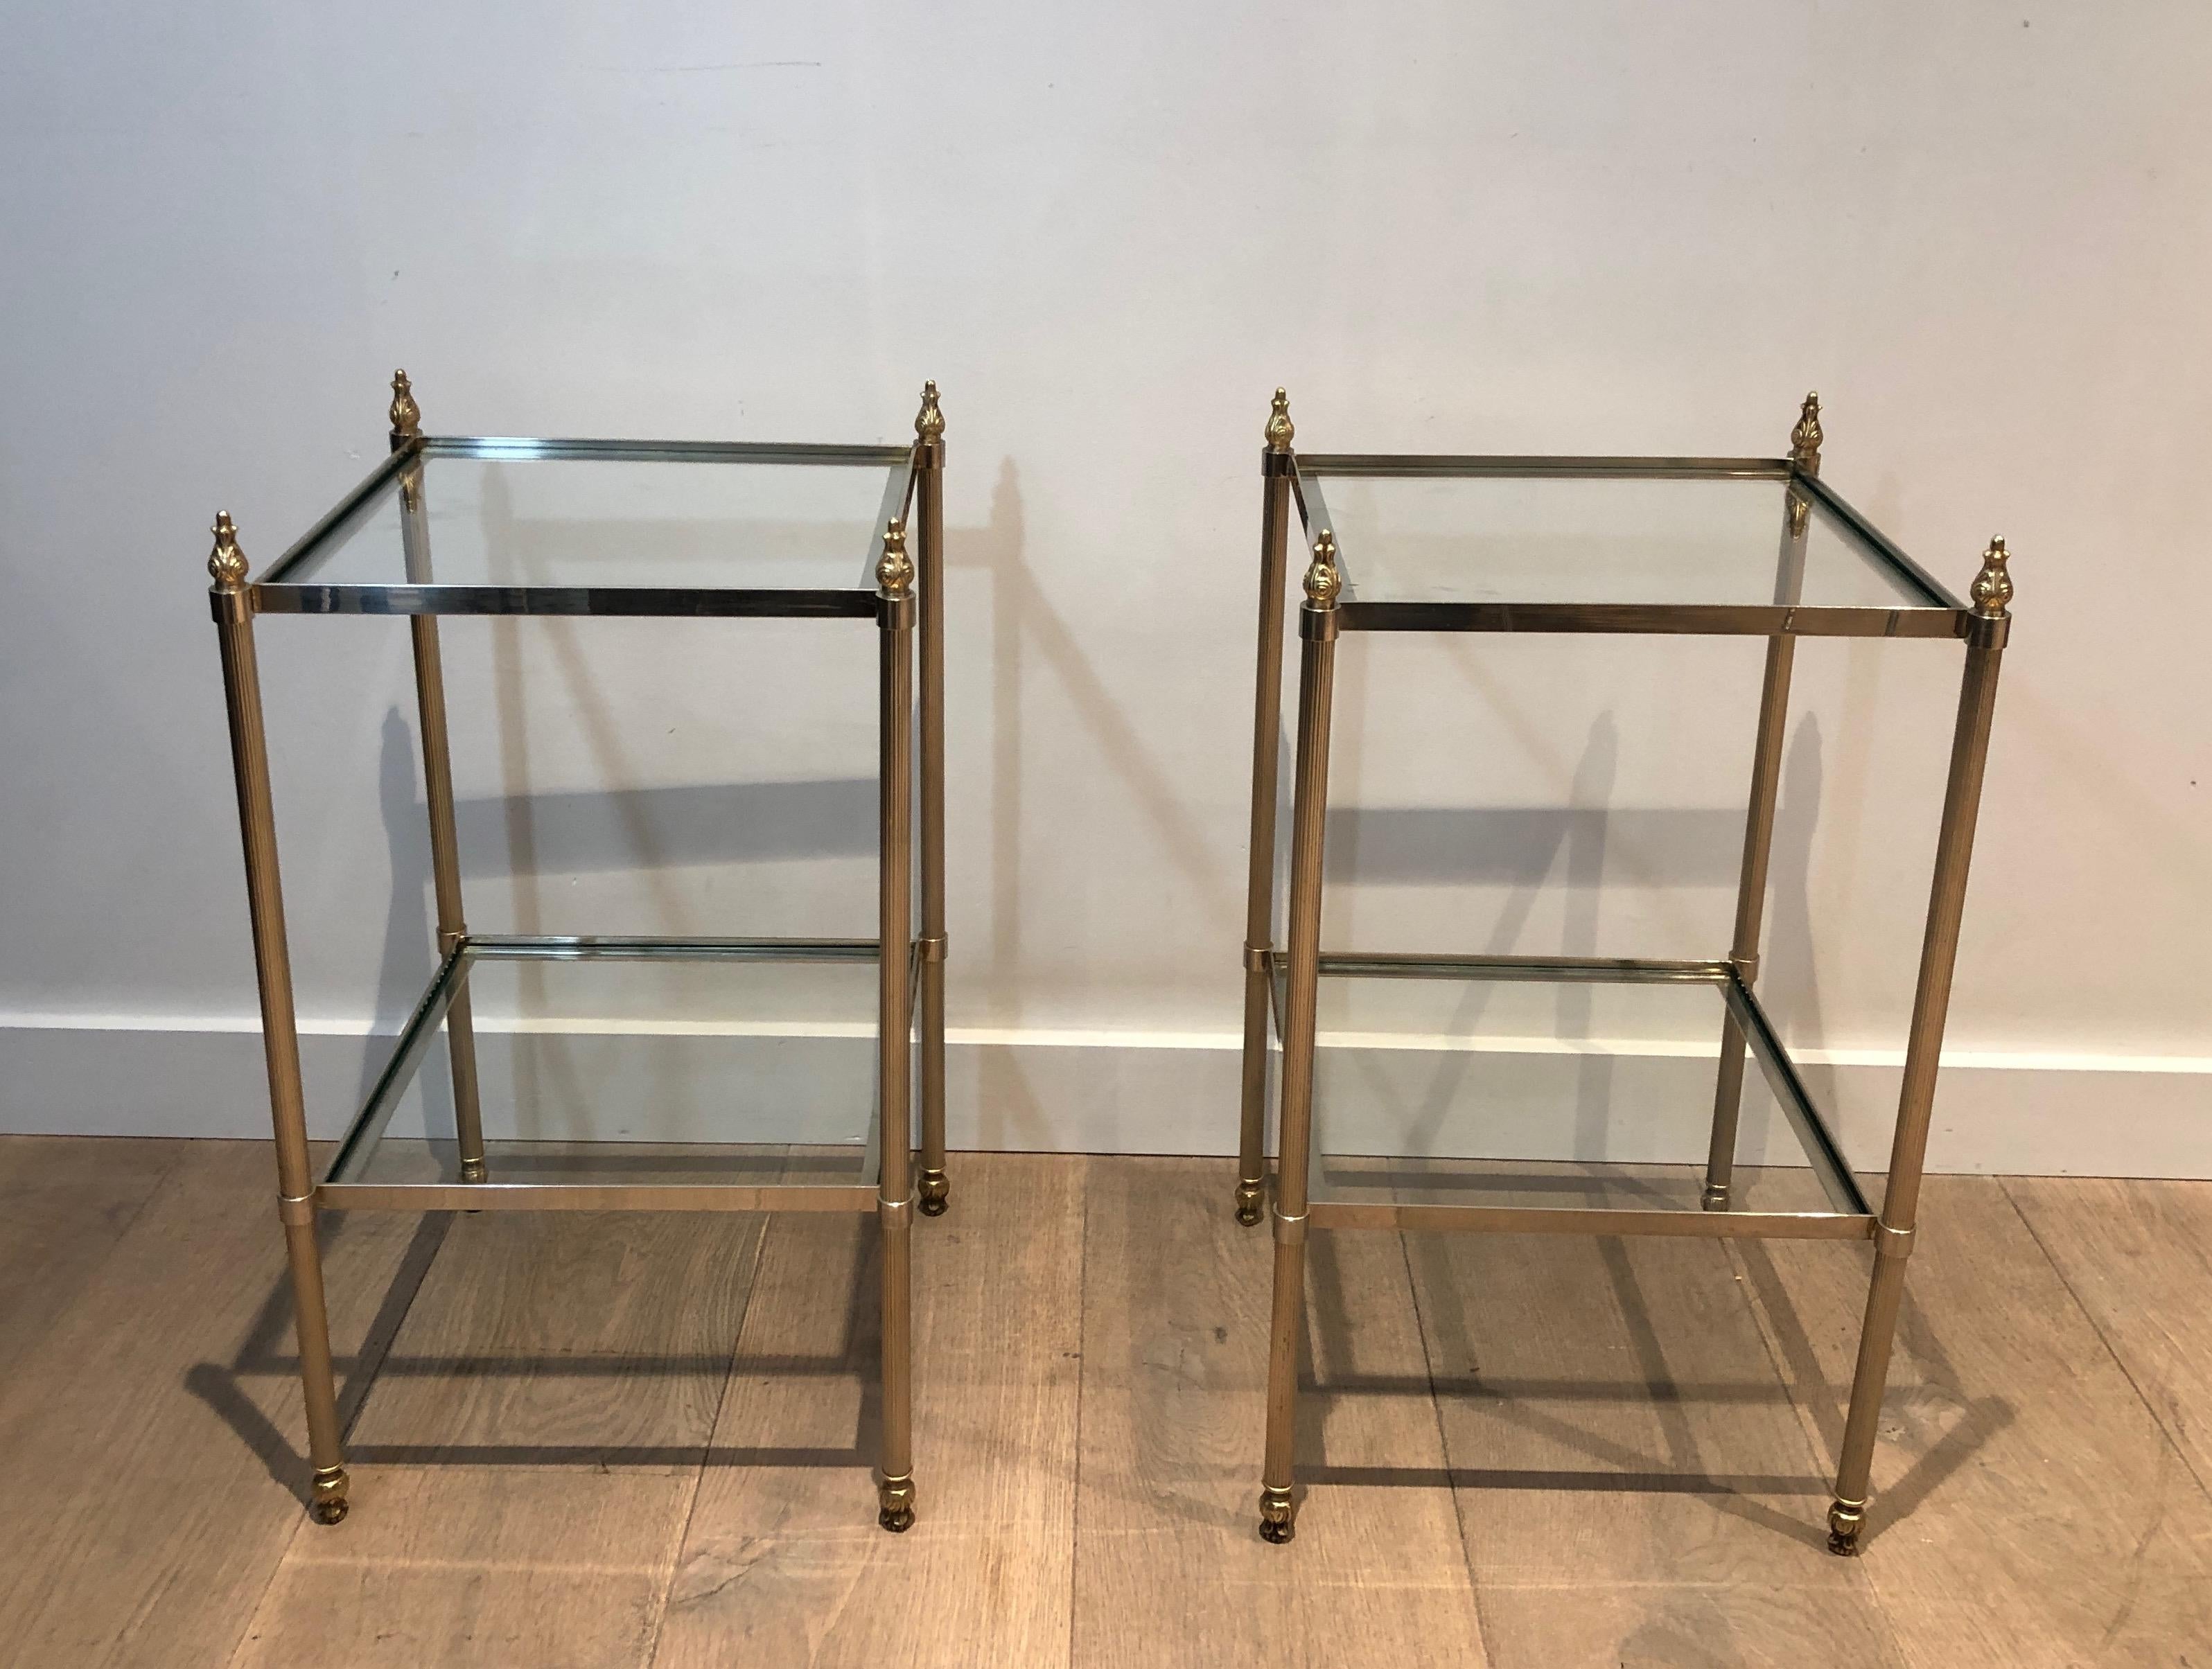 Silvered Pair of Silver Plated Side Tables with 2 Tiers and Fluted Legs, French Work Attr